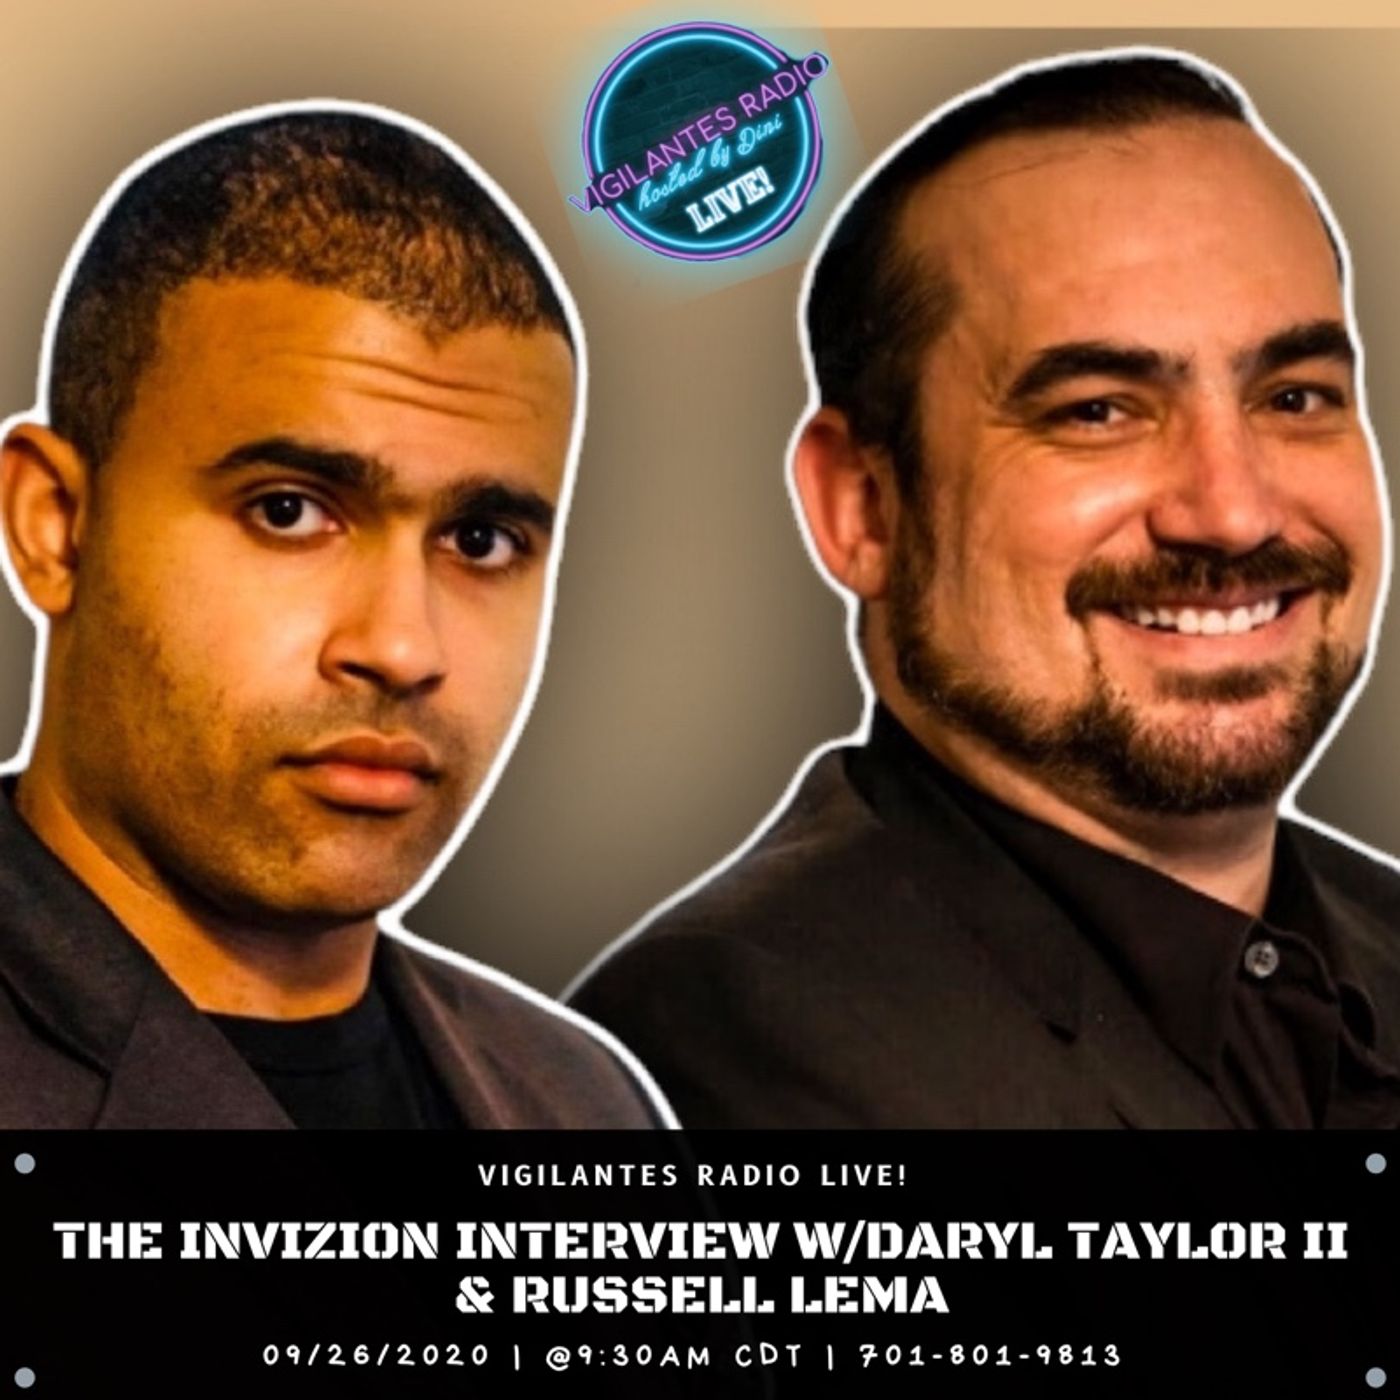 The Invizion Interview w/Daryl Taylor II & Russell Lema. Image